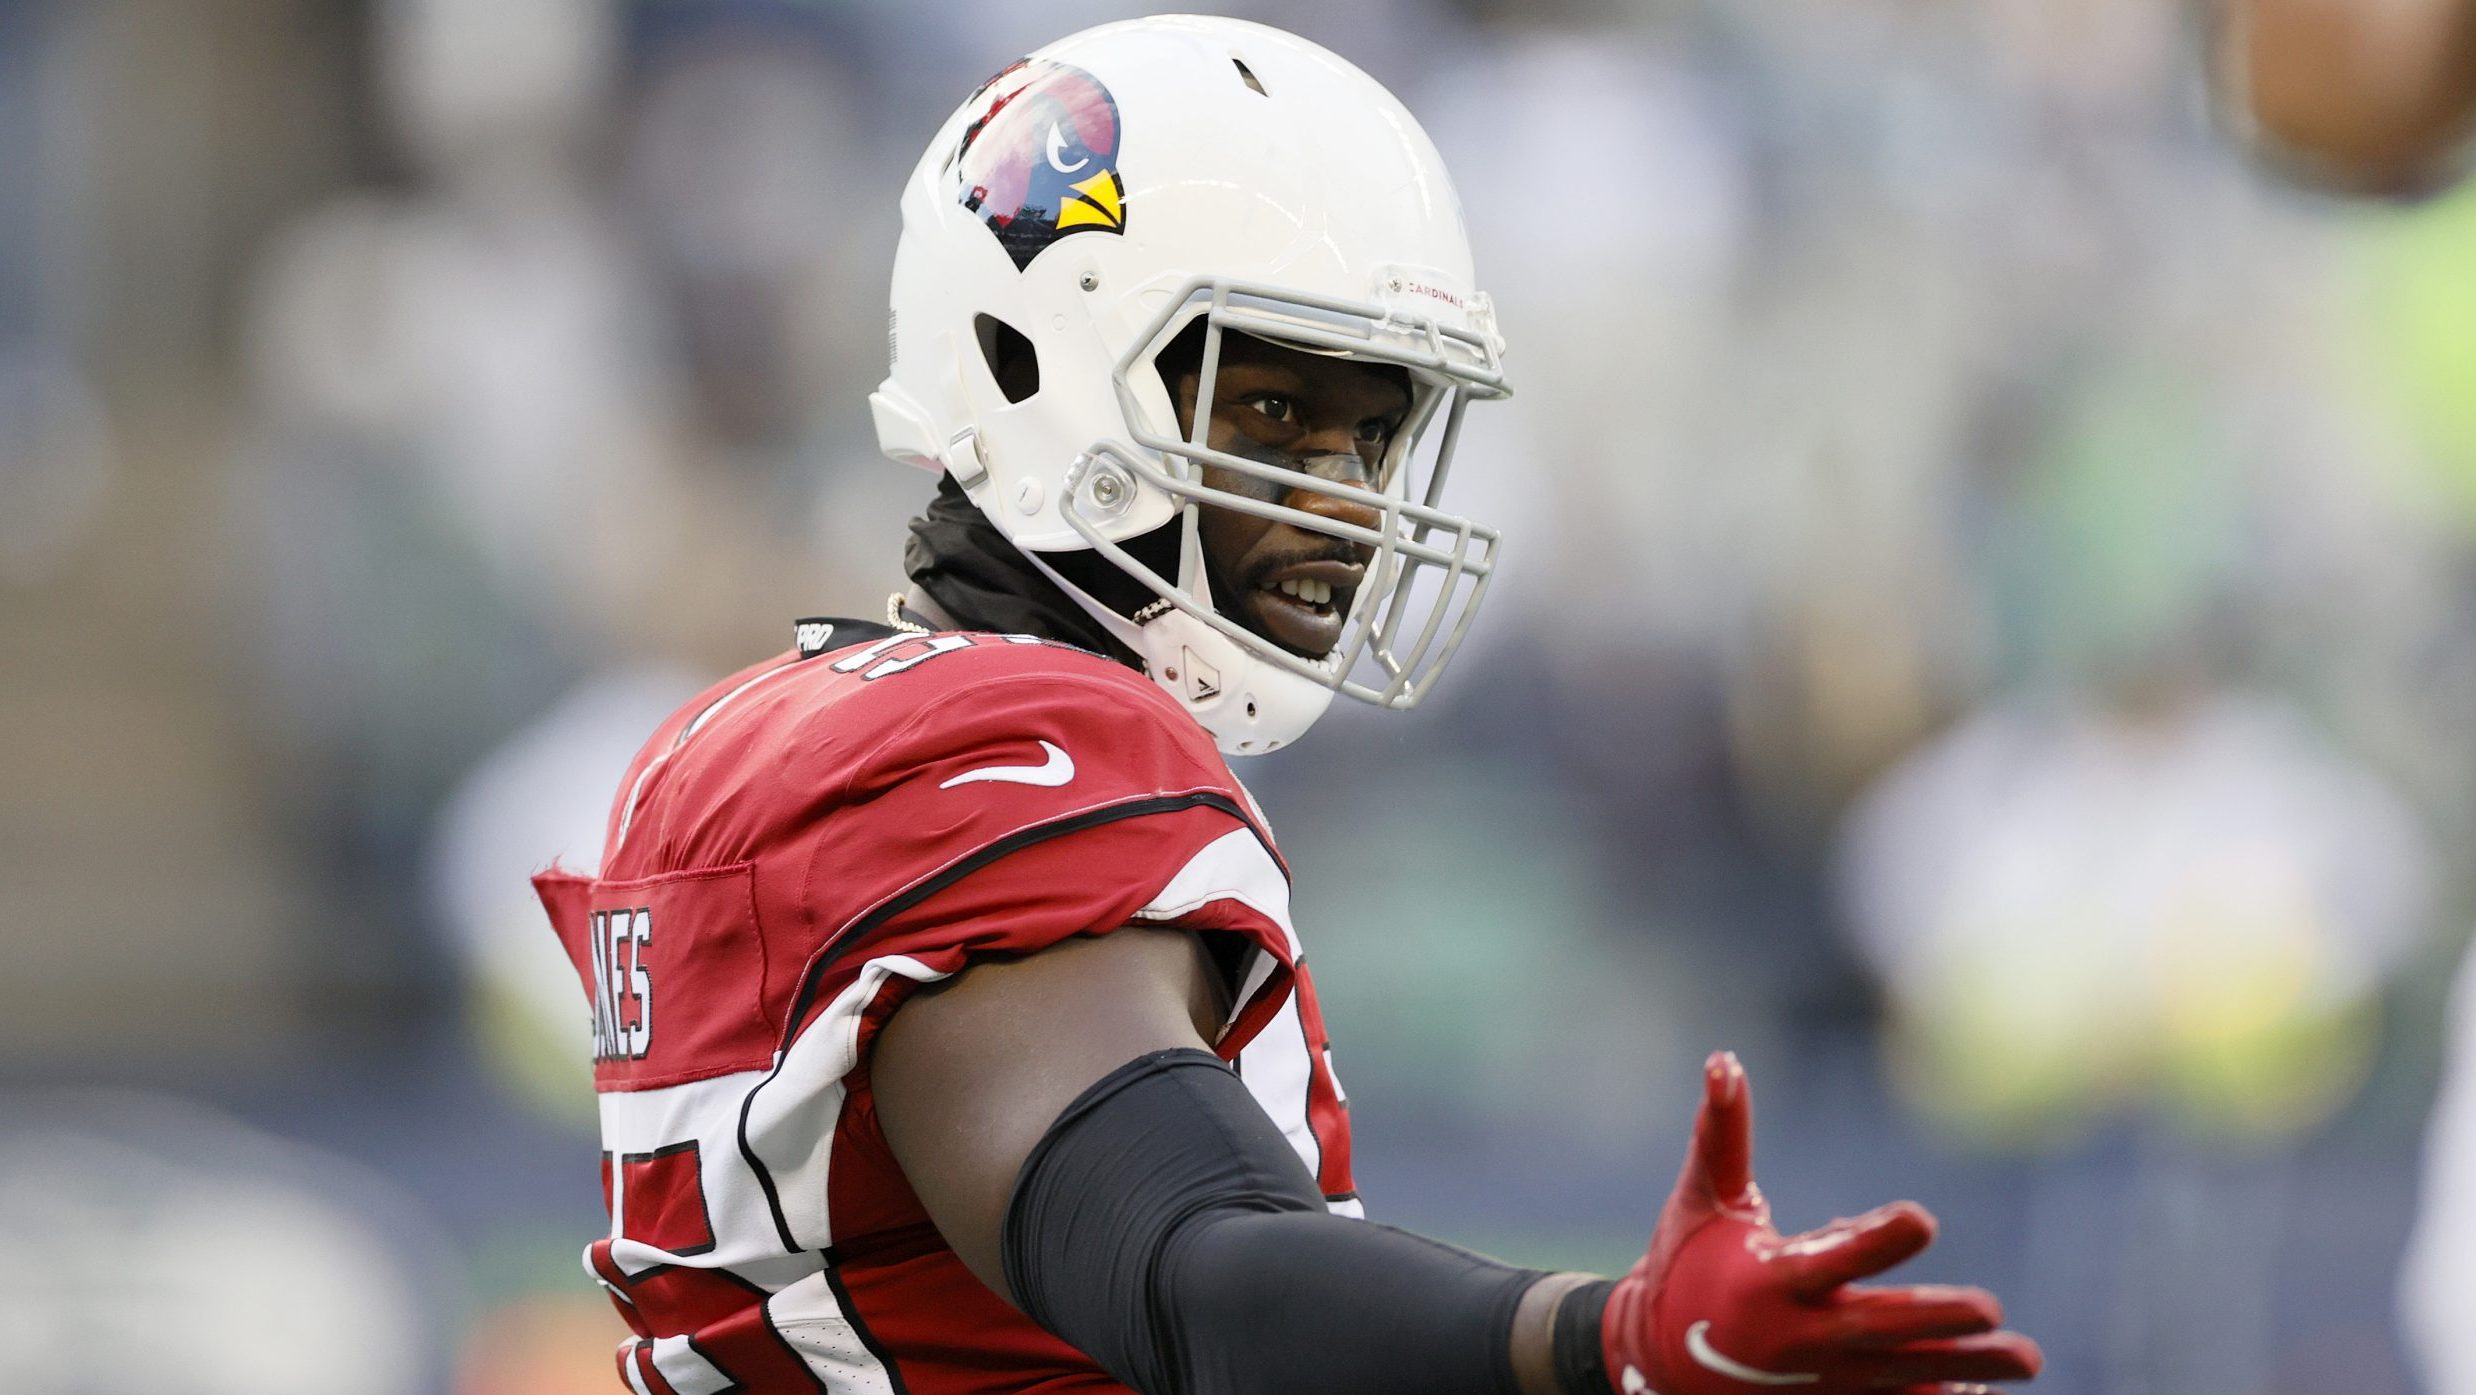 Chandler Jones #55 of the Arizona Cardinals reacts after his tackle against the Seattle Seahawks du...